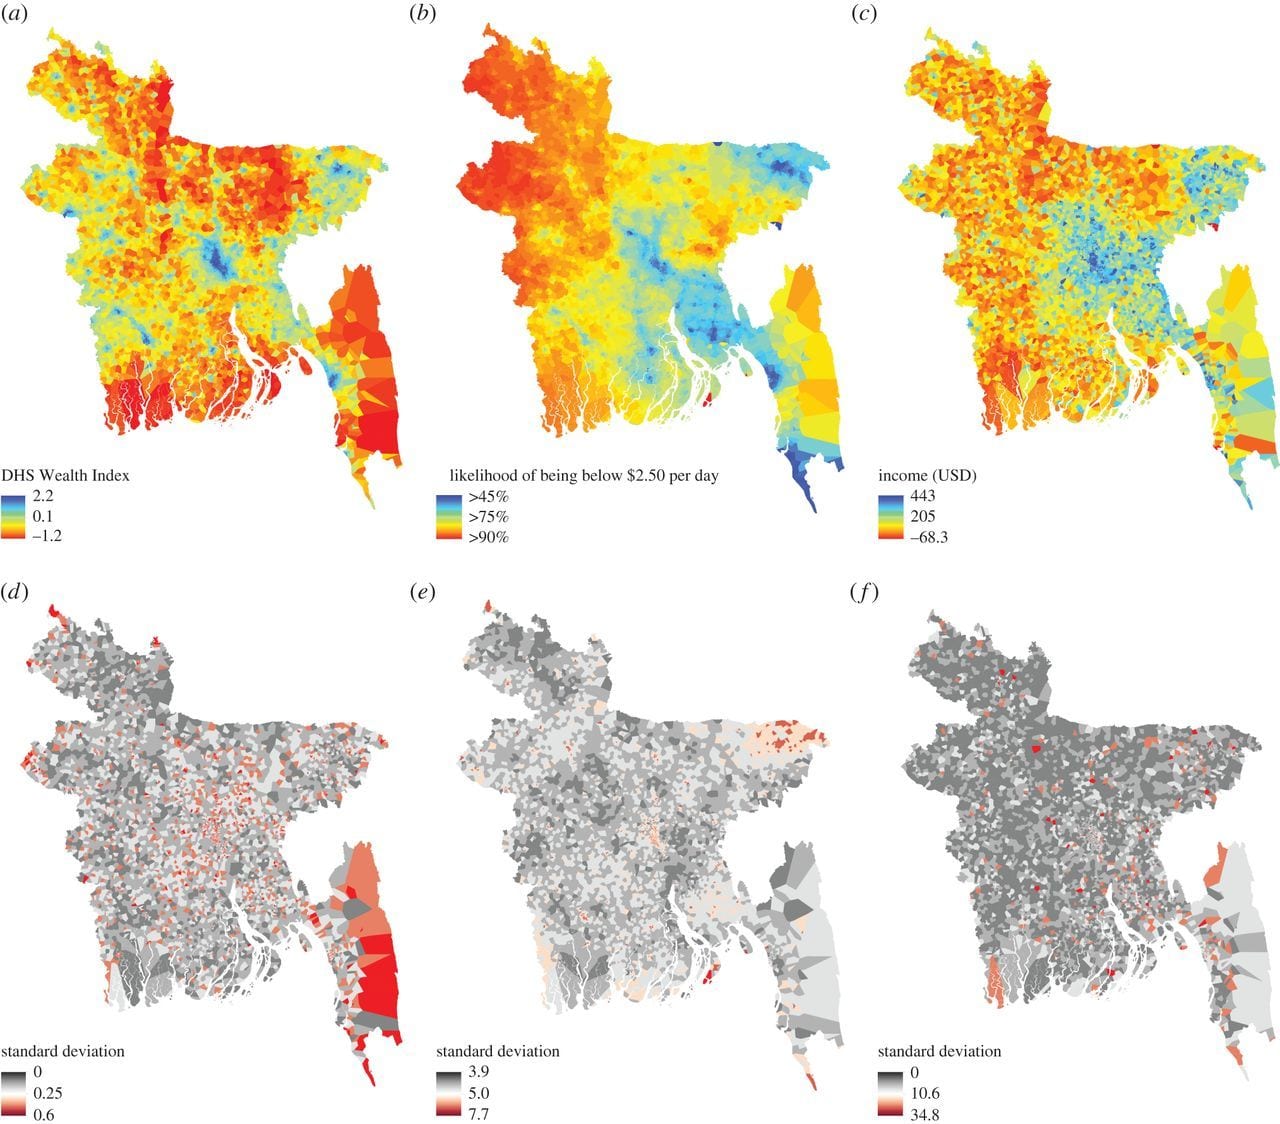 Prediction maps of socioeconomic indicators generated using call records, remote sensing data and geostatistical models